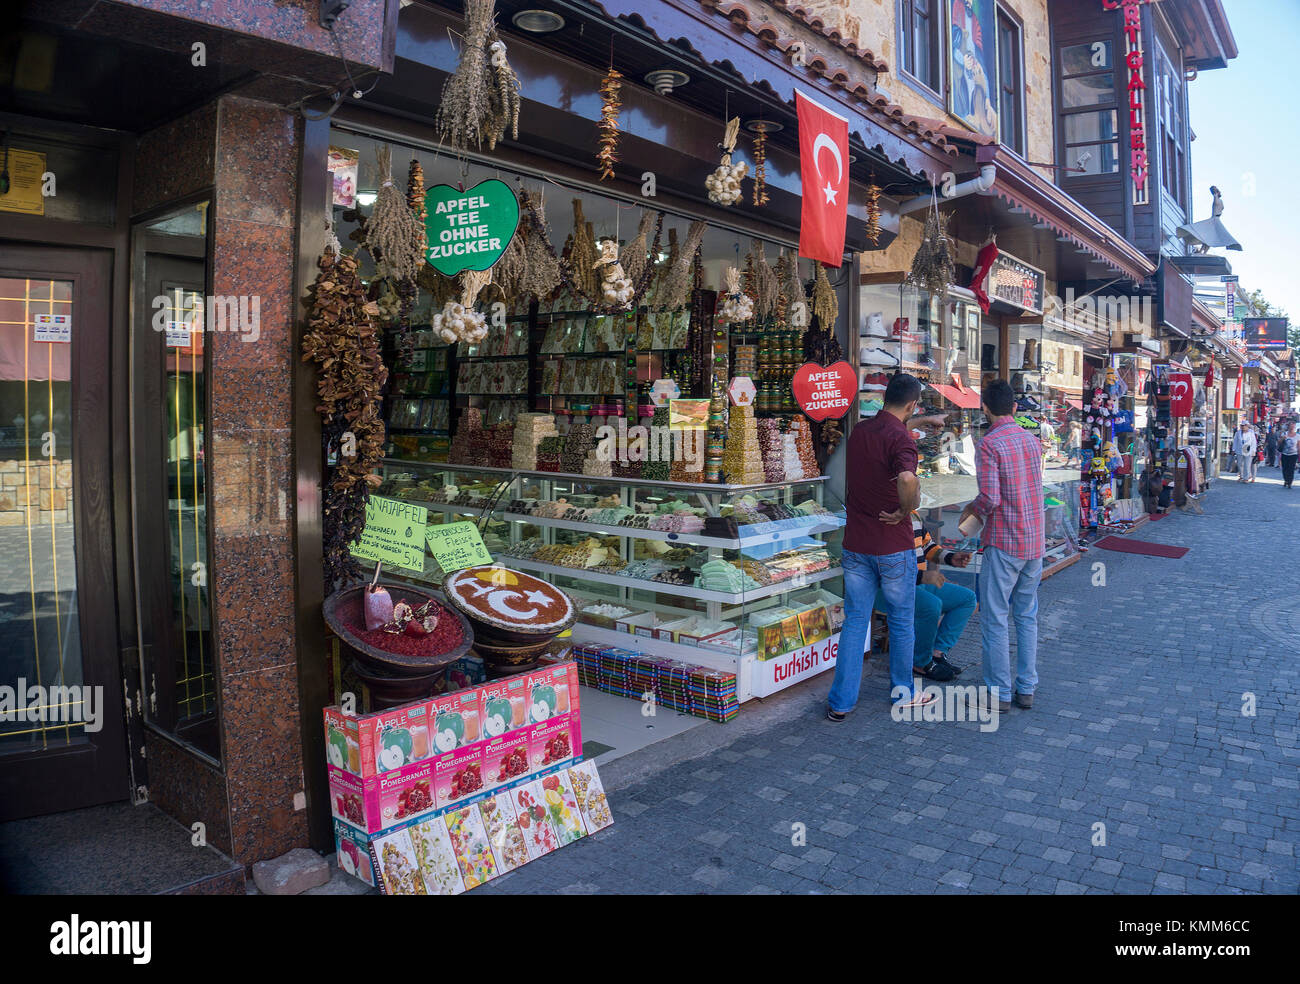 Bazaar, Souvenir shops at the old town of Side, turkish riviera, Turkey Stock Photo